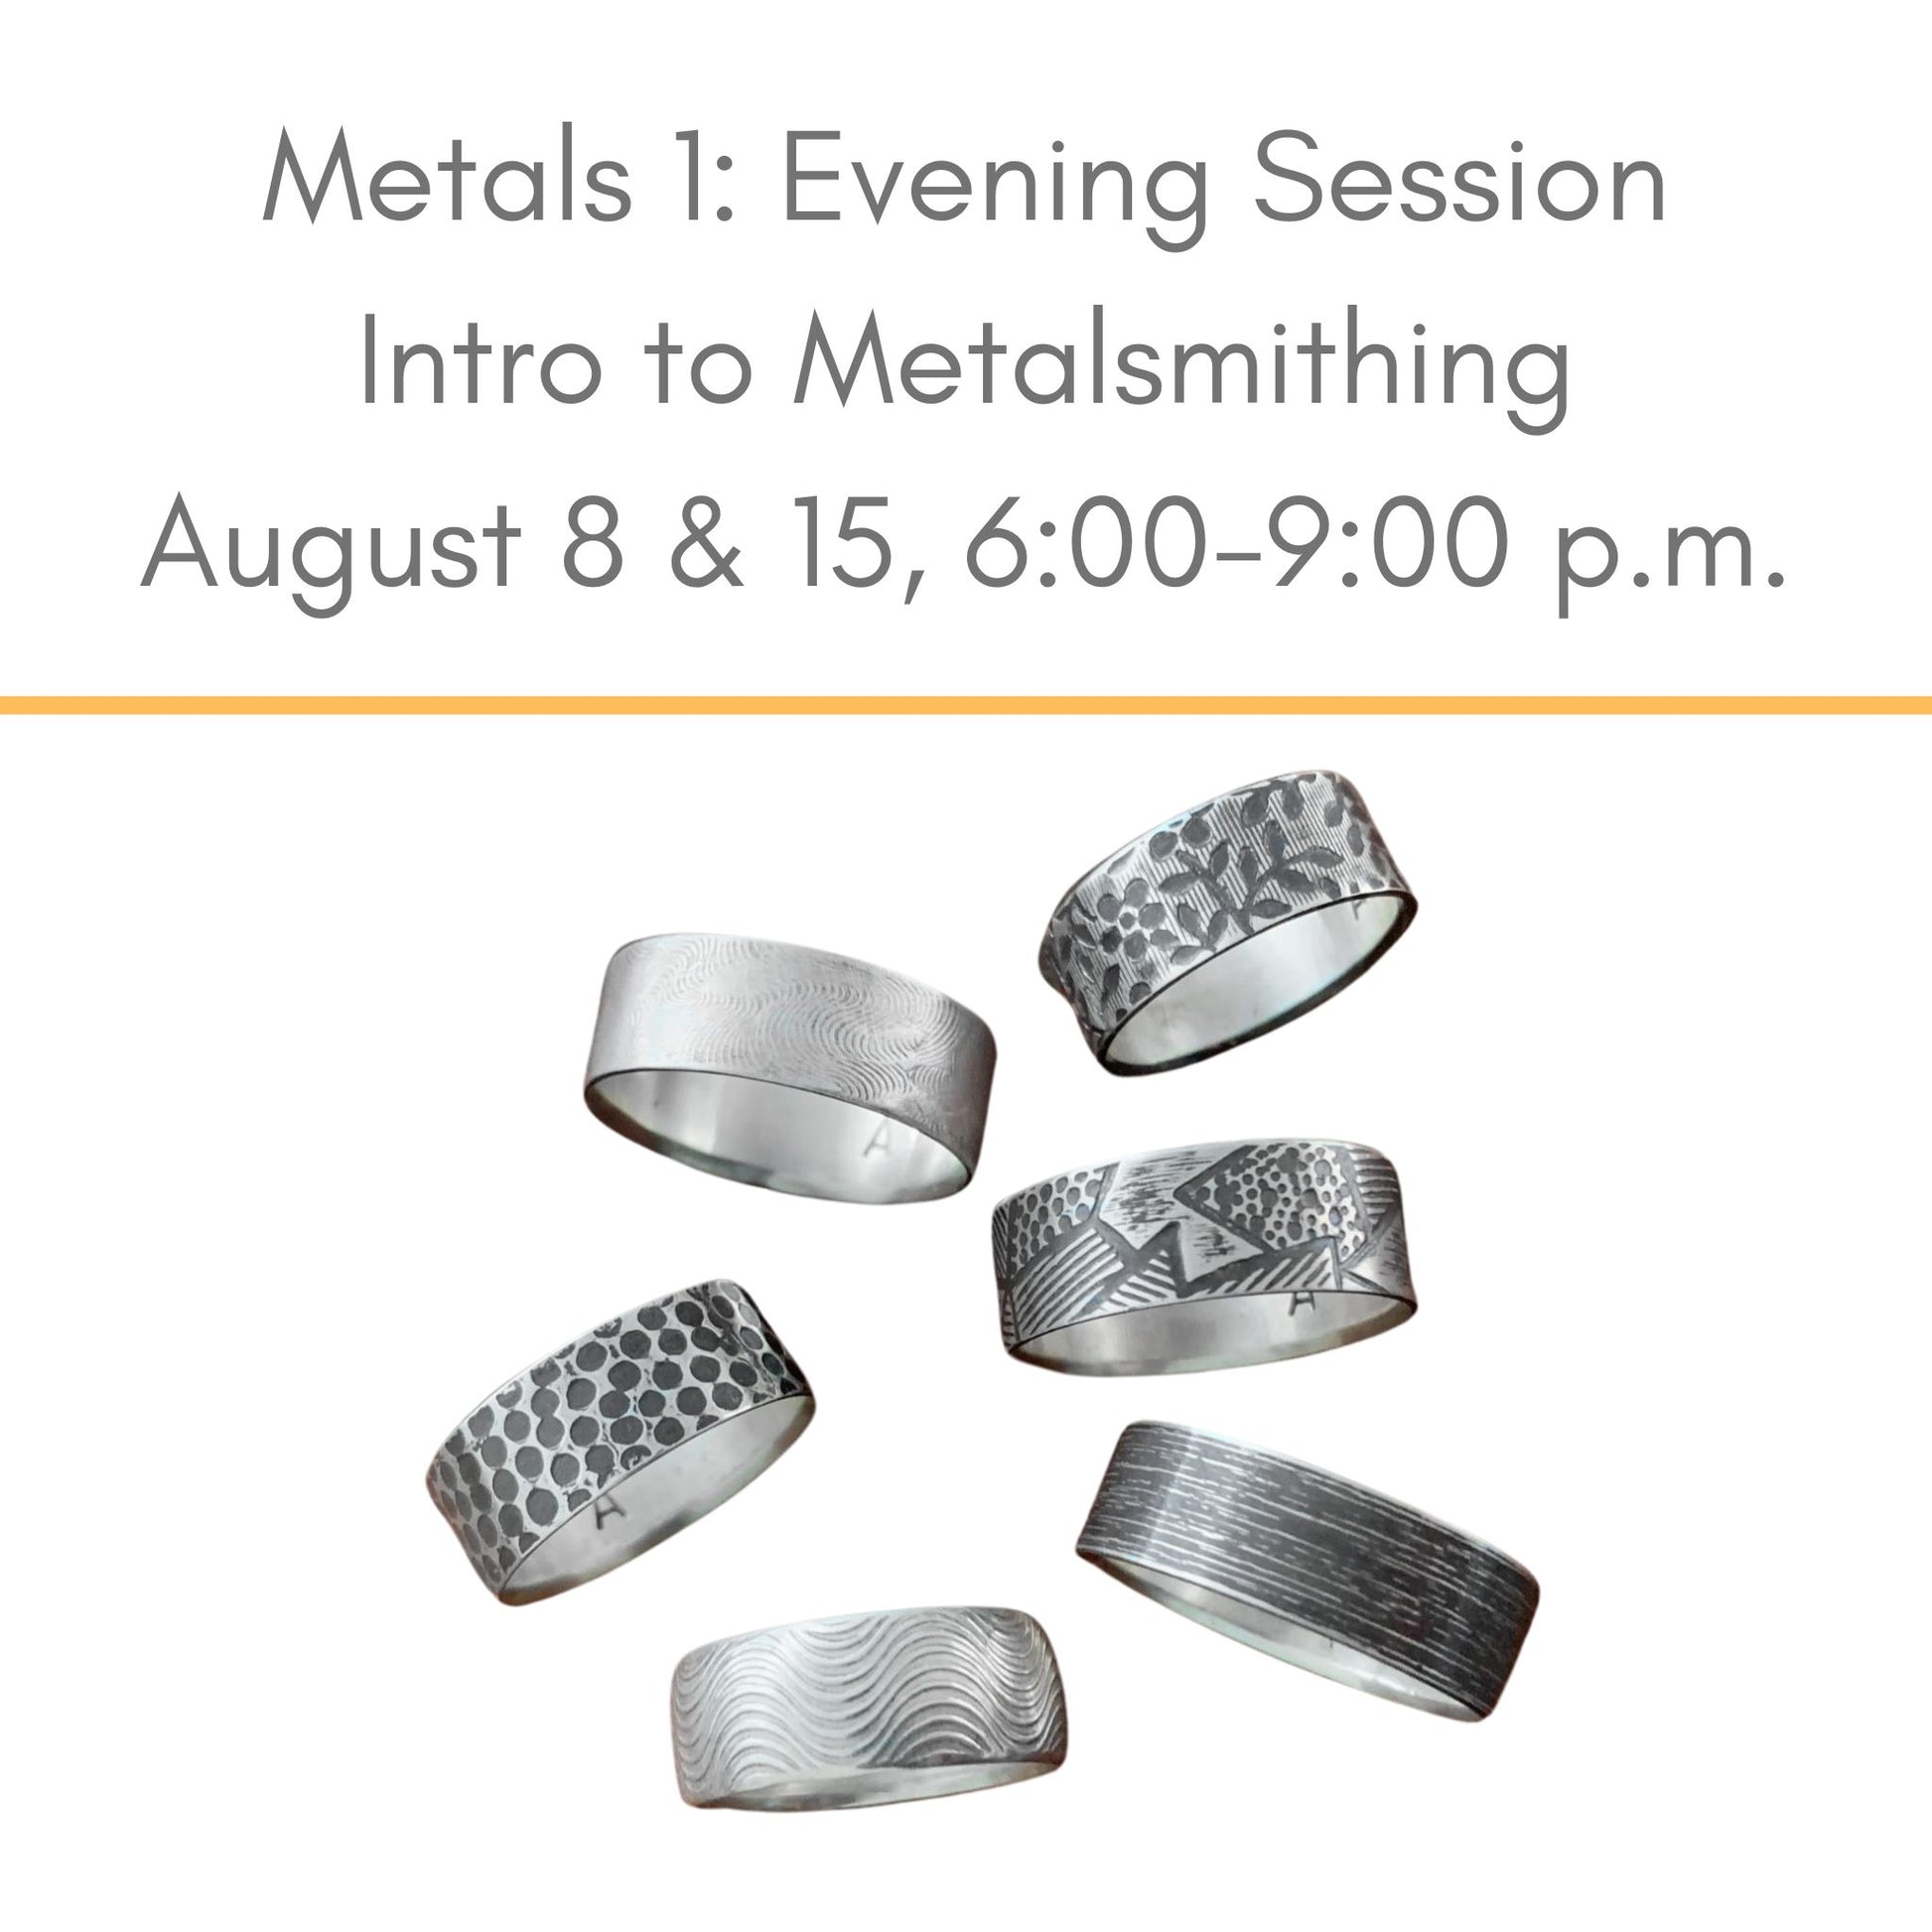 Intro to metalsmithing jewelry class August evening session